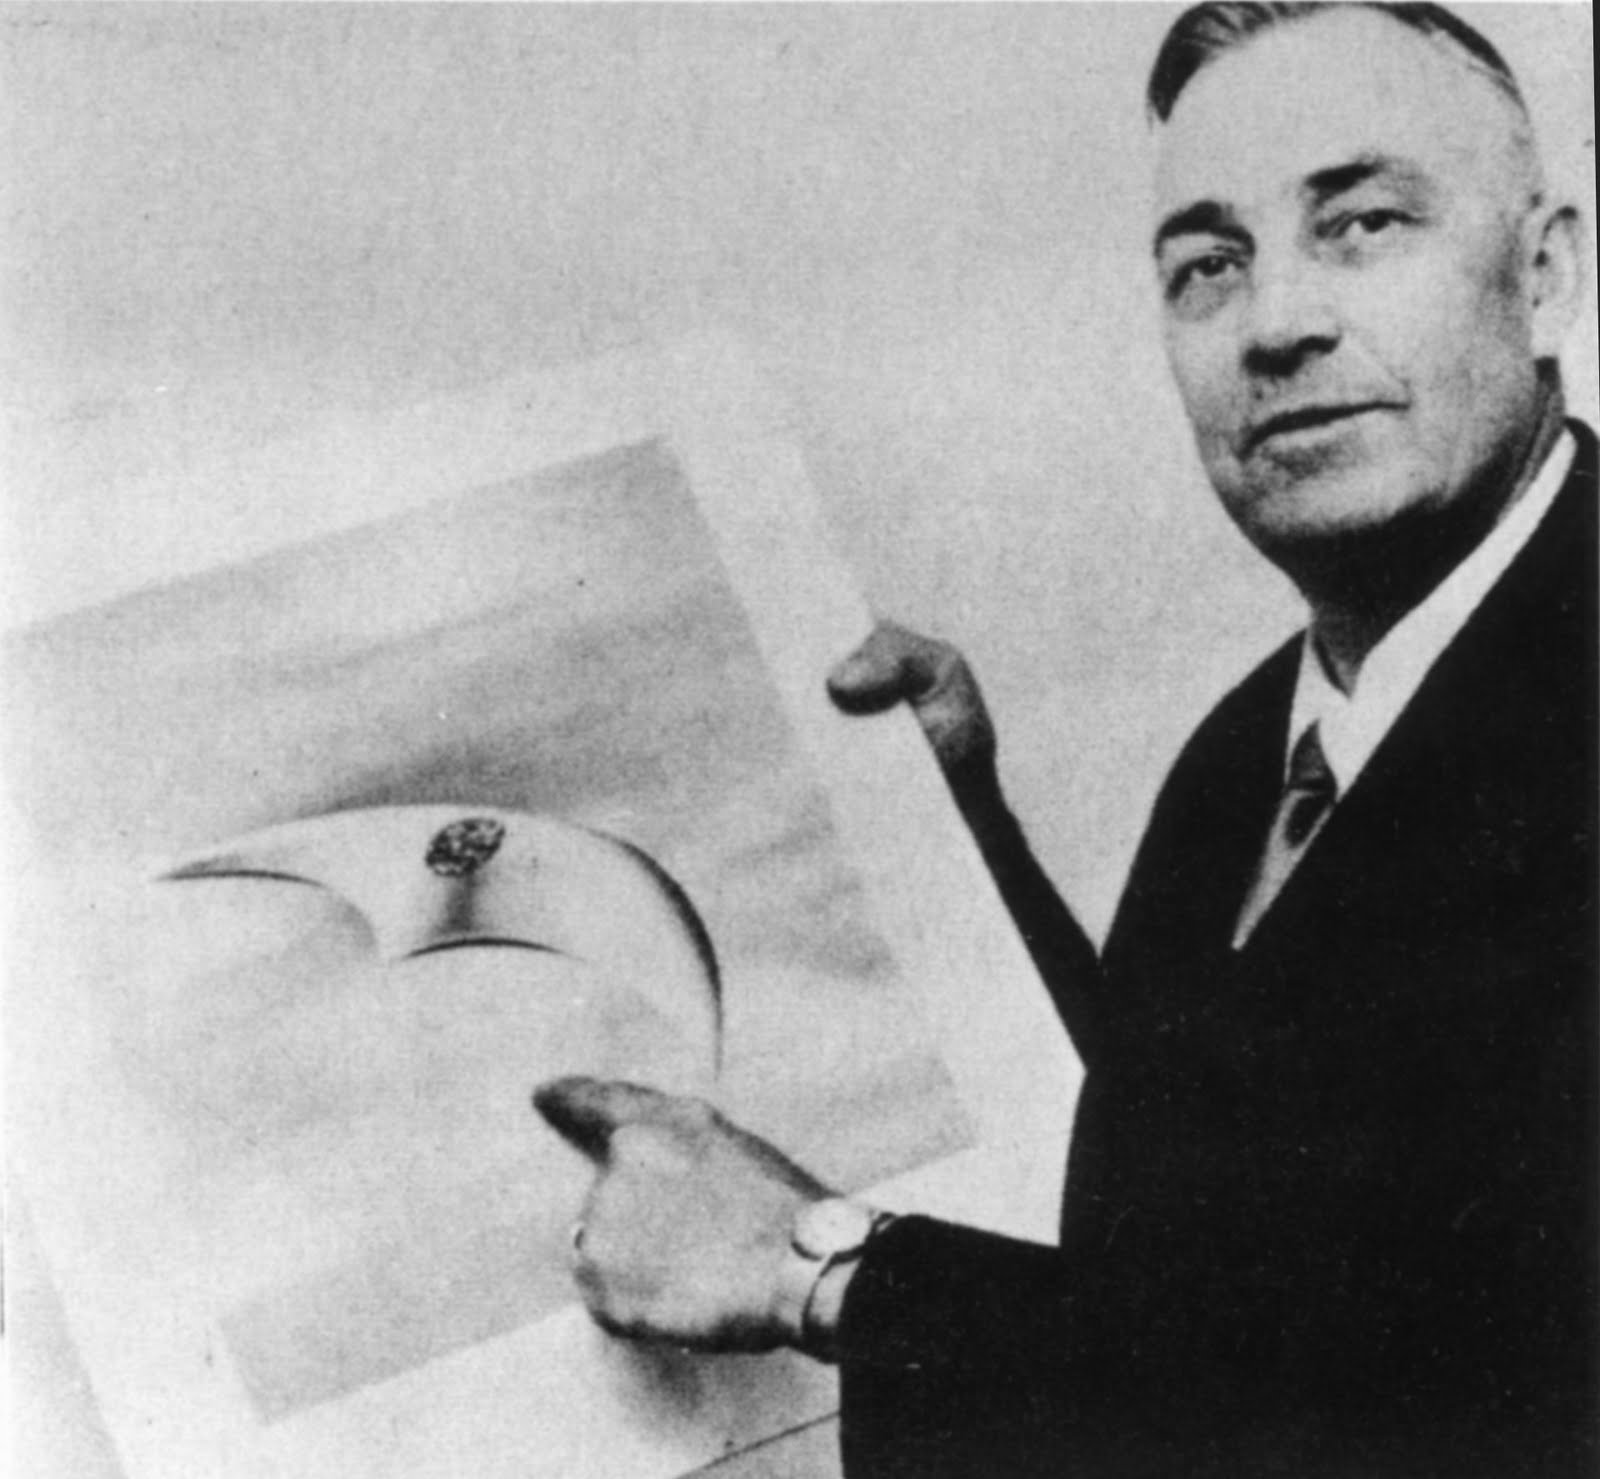 Pilot Kenneth Arnold with a sketch of one of the UFOs he saw near Mt. Rainier in 1947